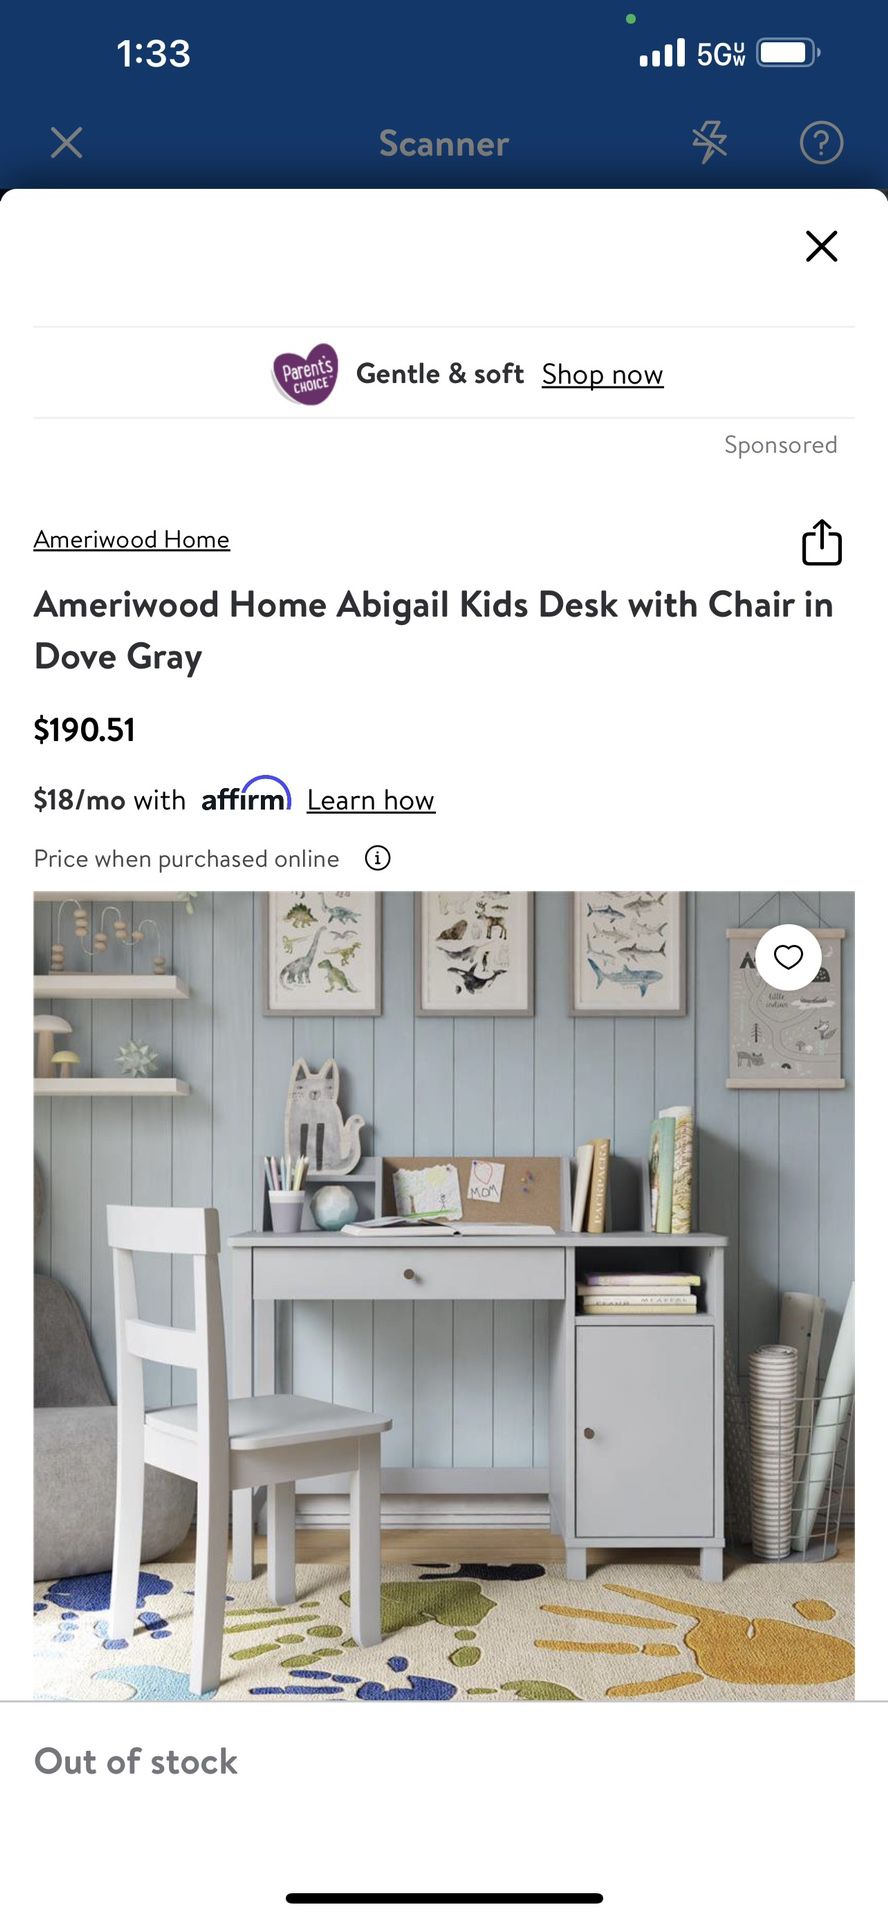 Ameriwood Home Abigail Kids Desk with Chair in Dove Gray Pm if interested